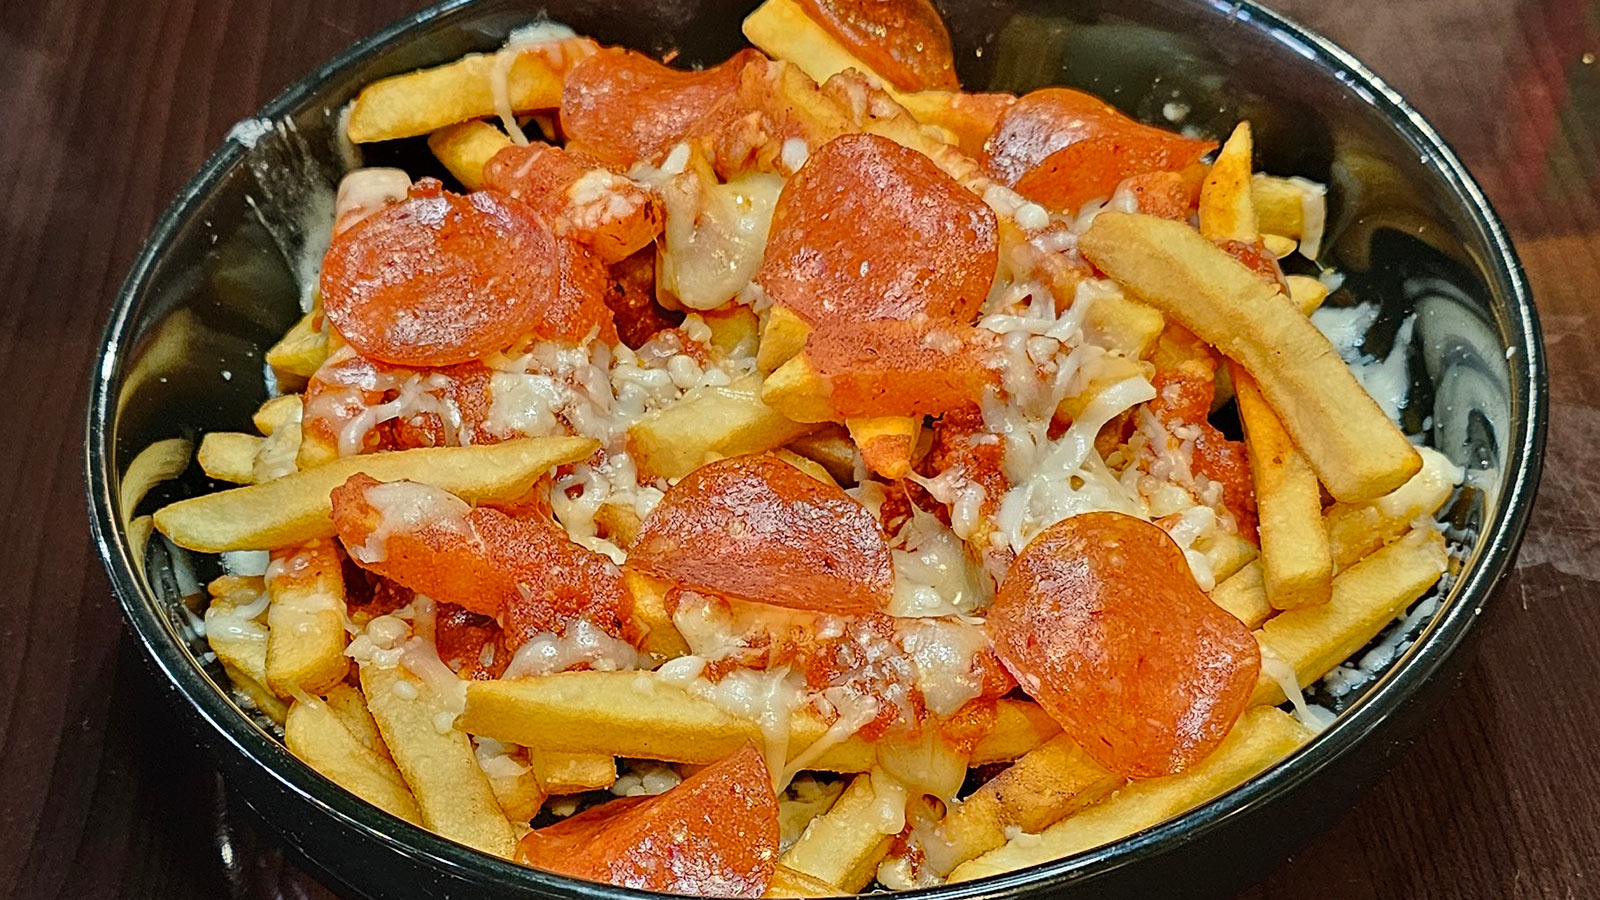 Pizza French Fries